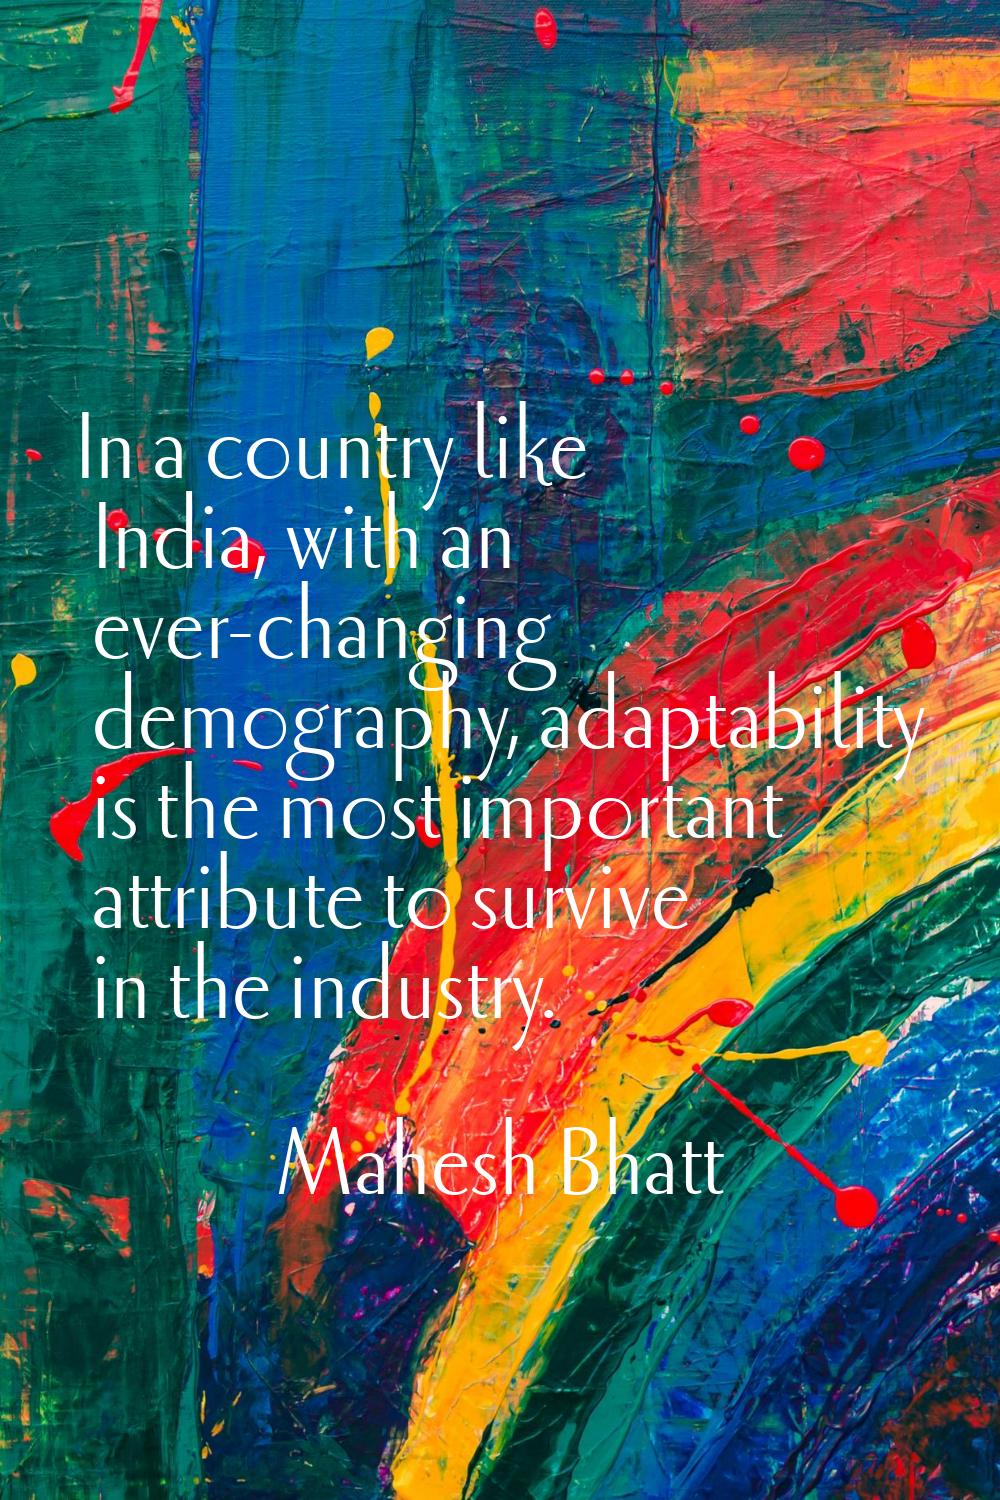 In a country like India, with an ever-changing demography, adaptability is the most important attri